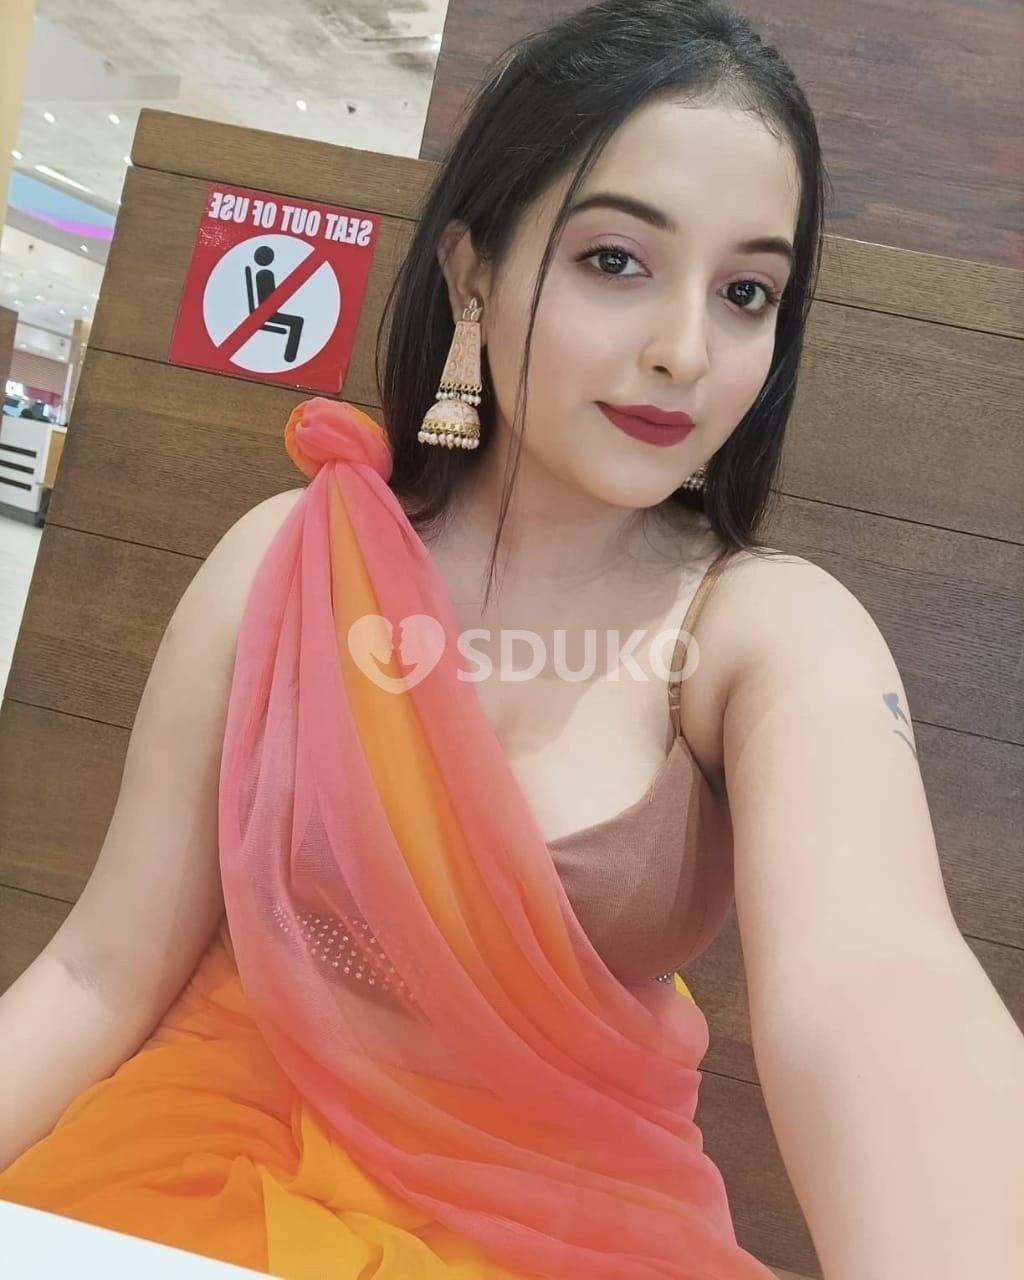 Darbhanga best.,.✓VIP high profile independent call girl service today low price model available 🥰:⁠-⁠)...